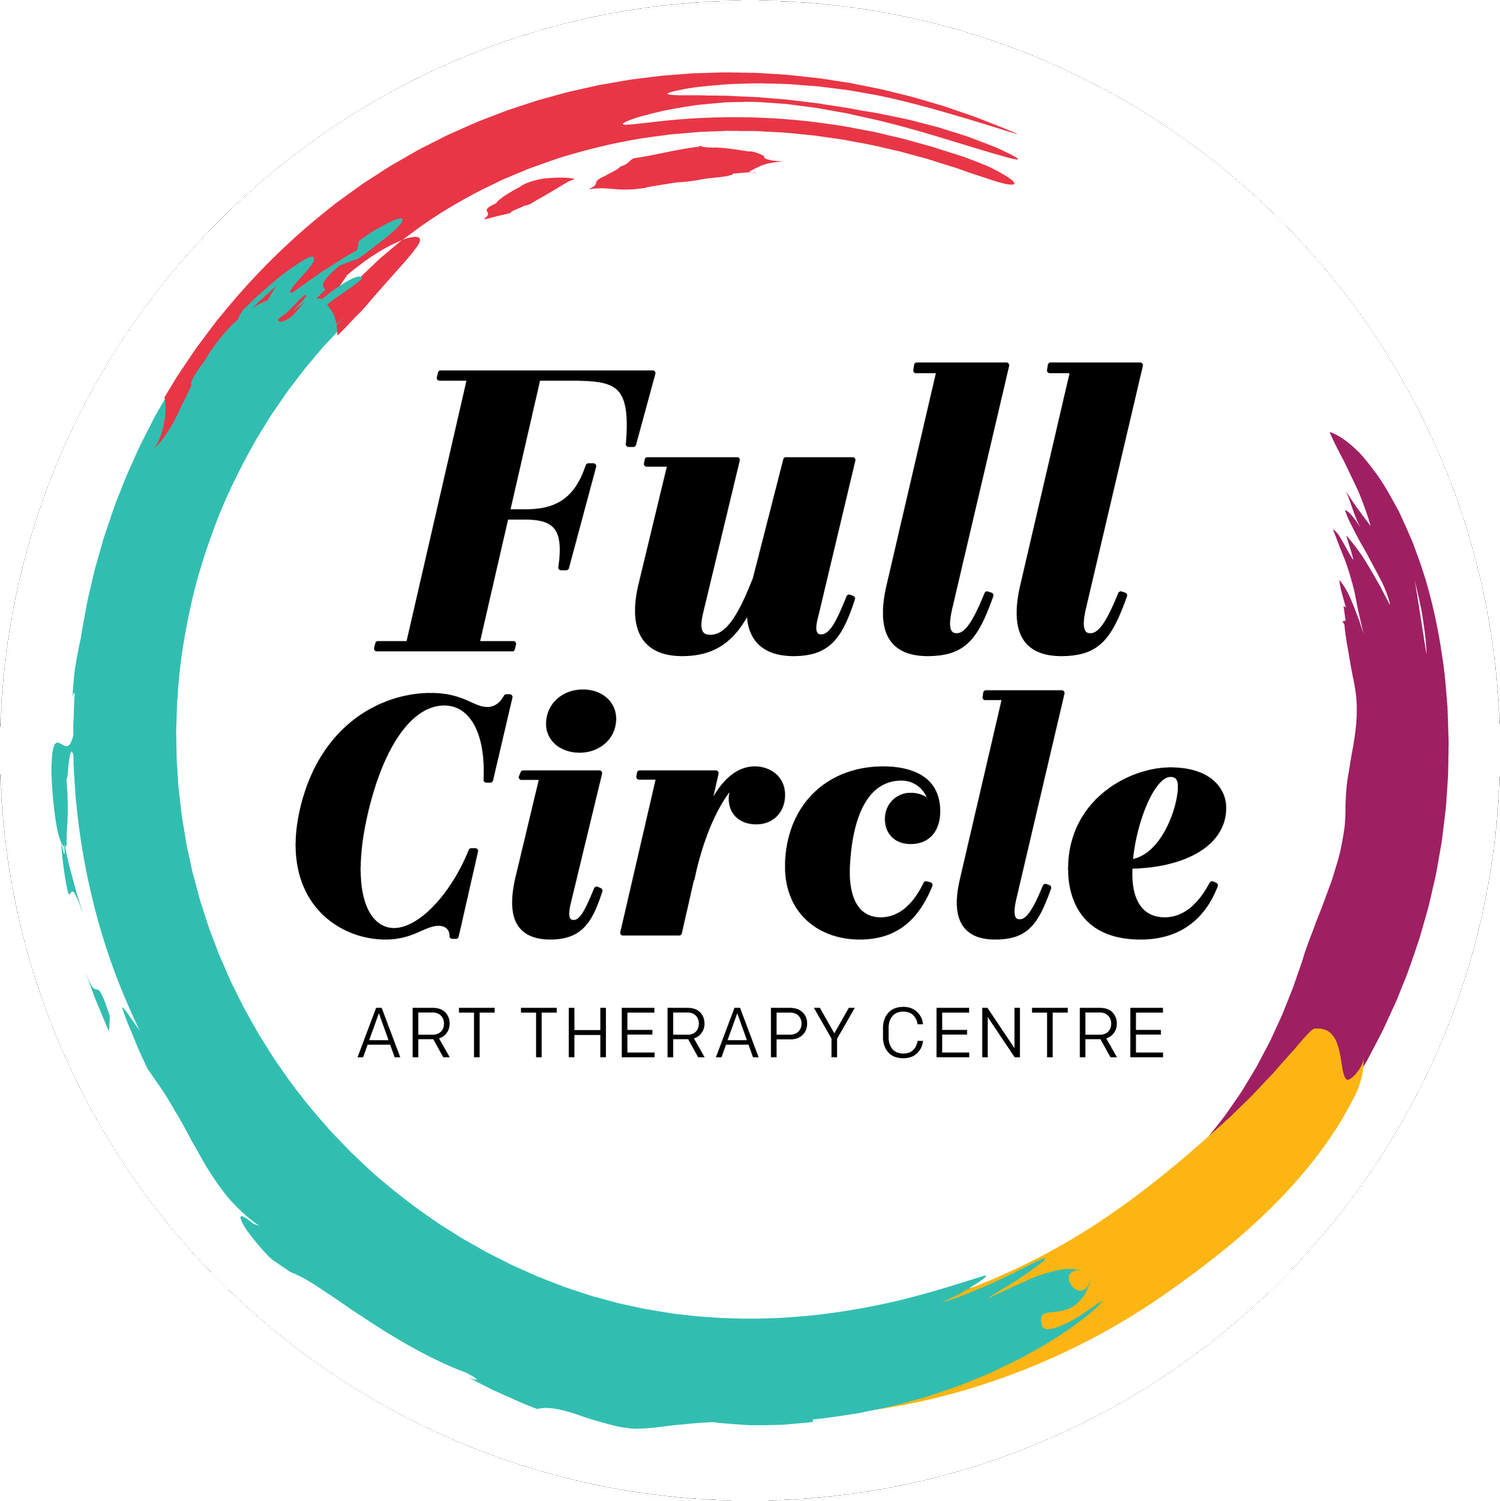 Full Circle - Art Therapy Centre